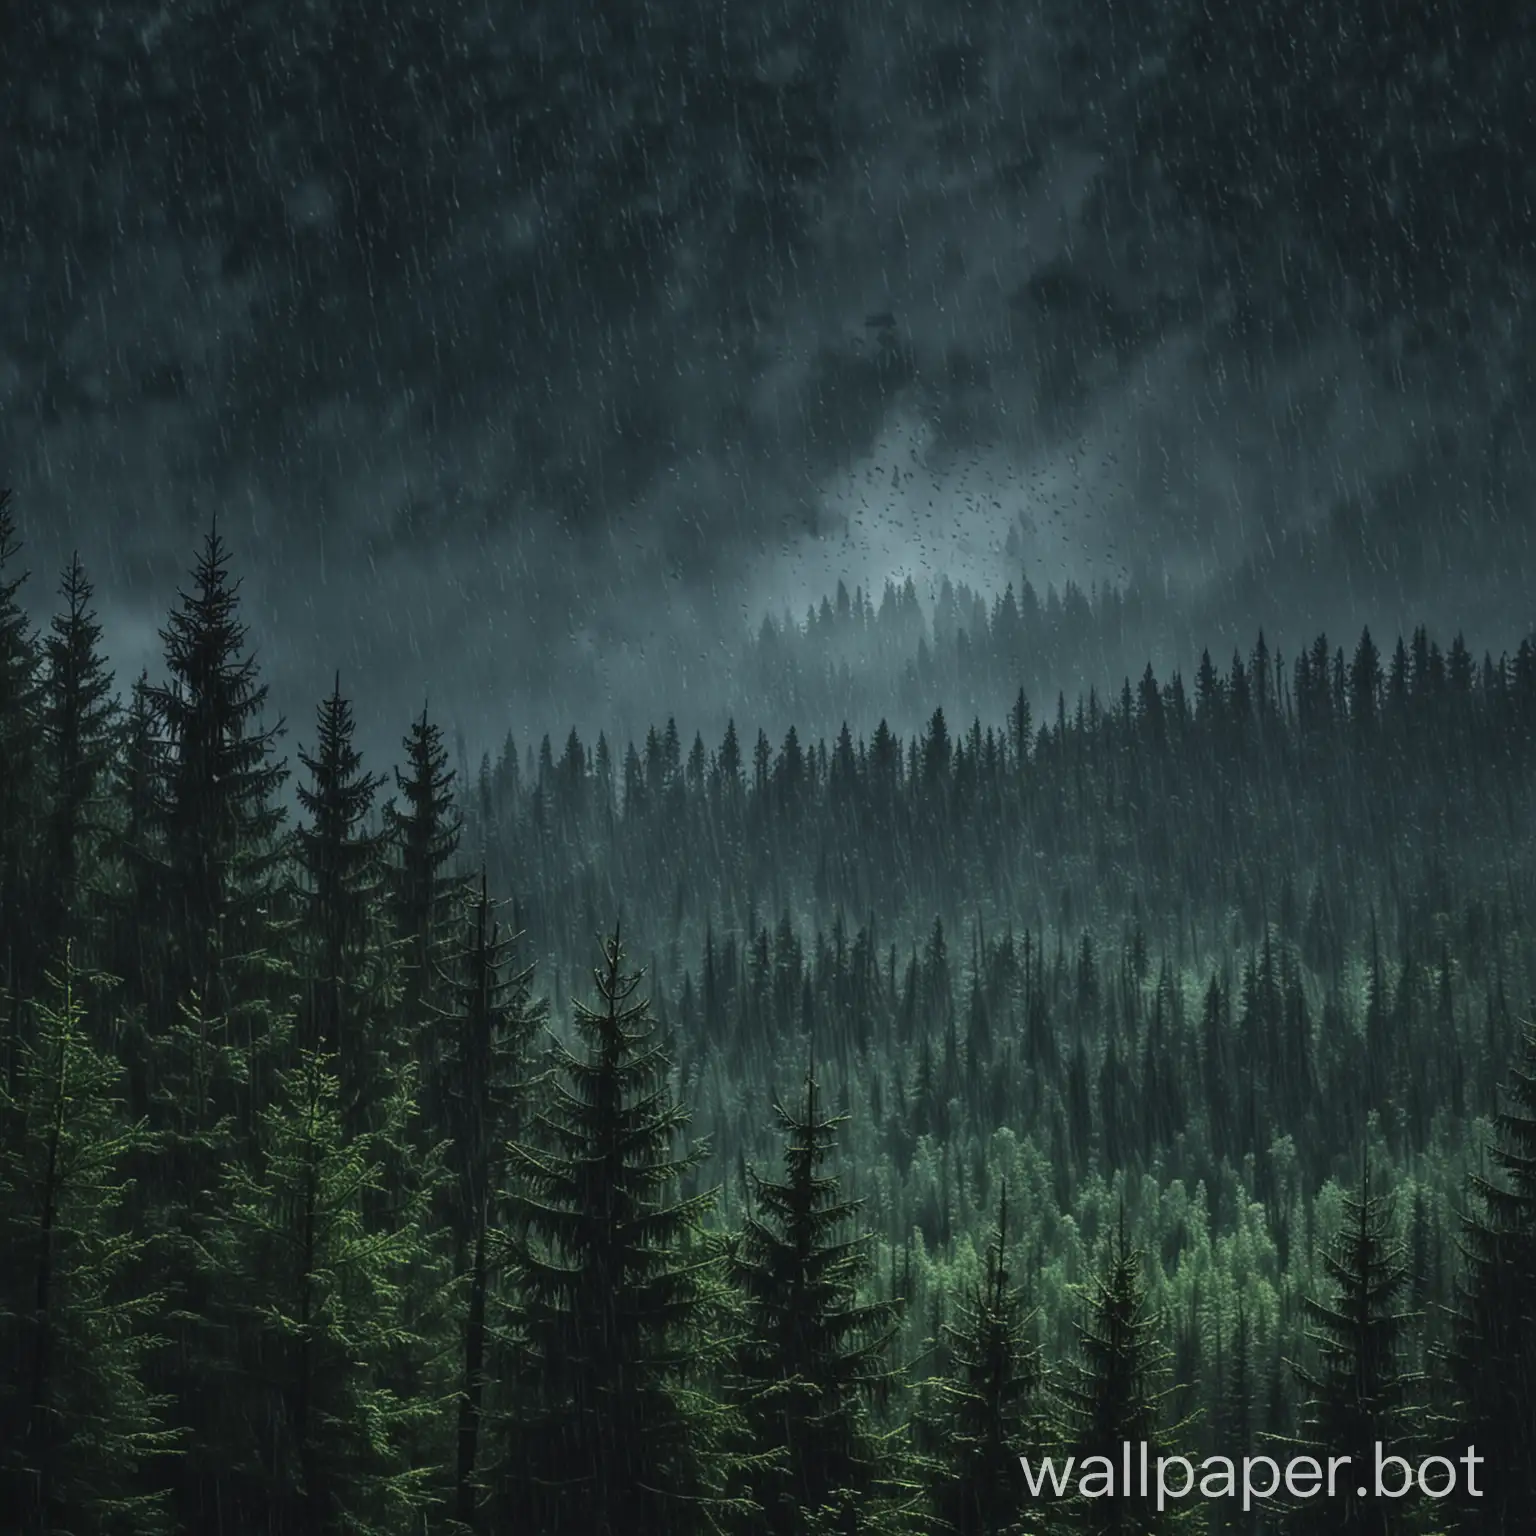 Rain on the background of a coniferous night forest